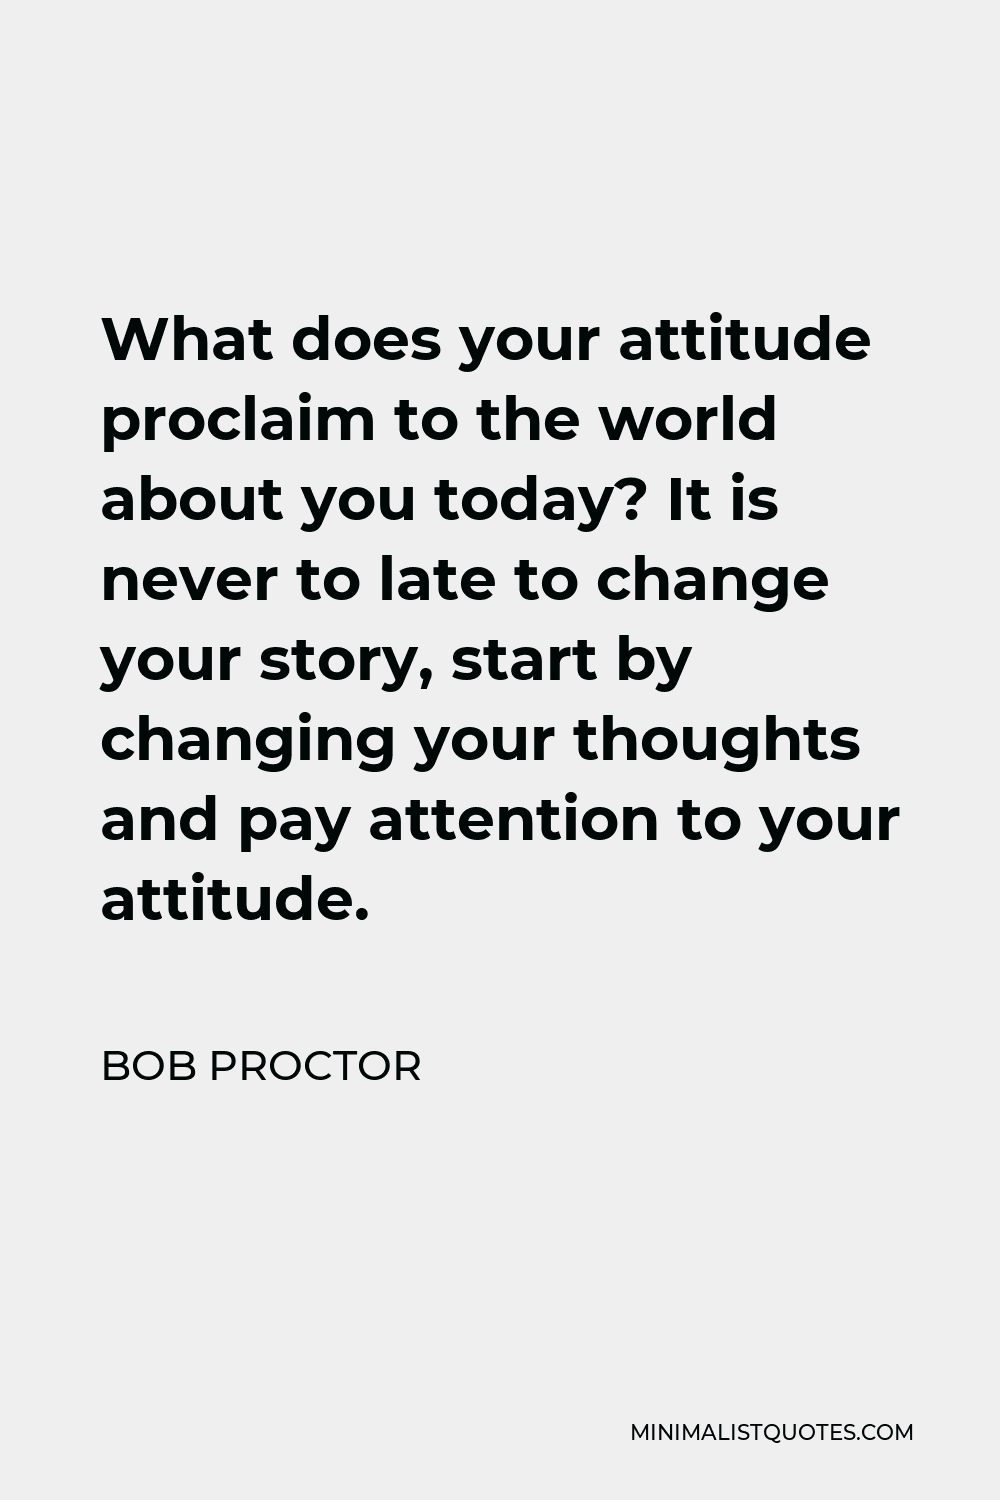 Bob Proctor Quote - What does your attitude proclaim to the world about you today? It is never to late to change your story, start by changing your thoughts and pay attention to your attitude.